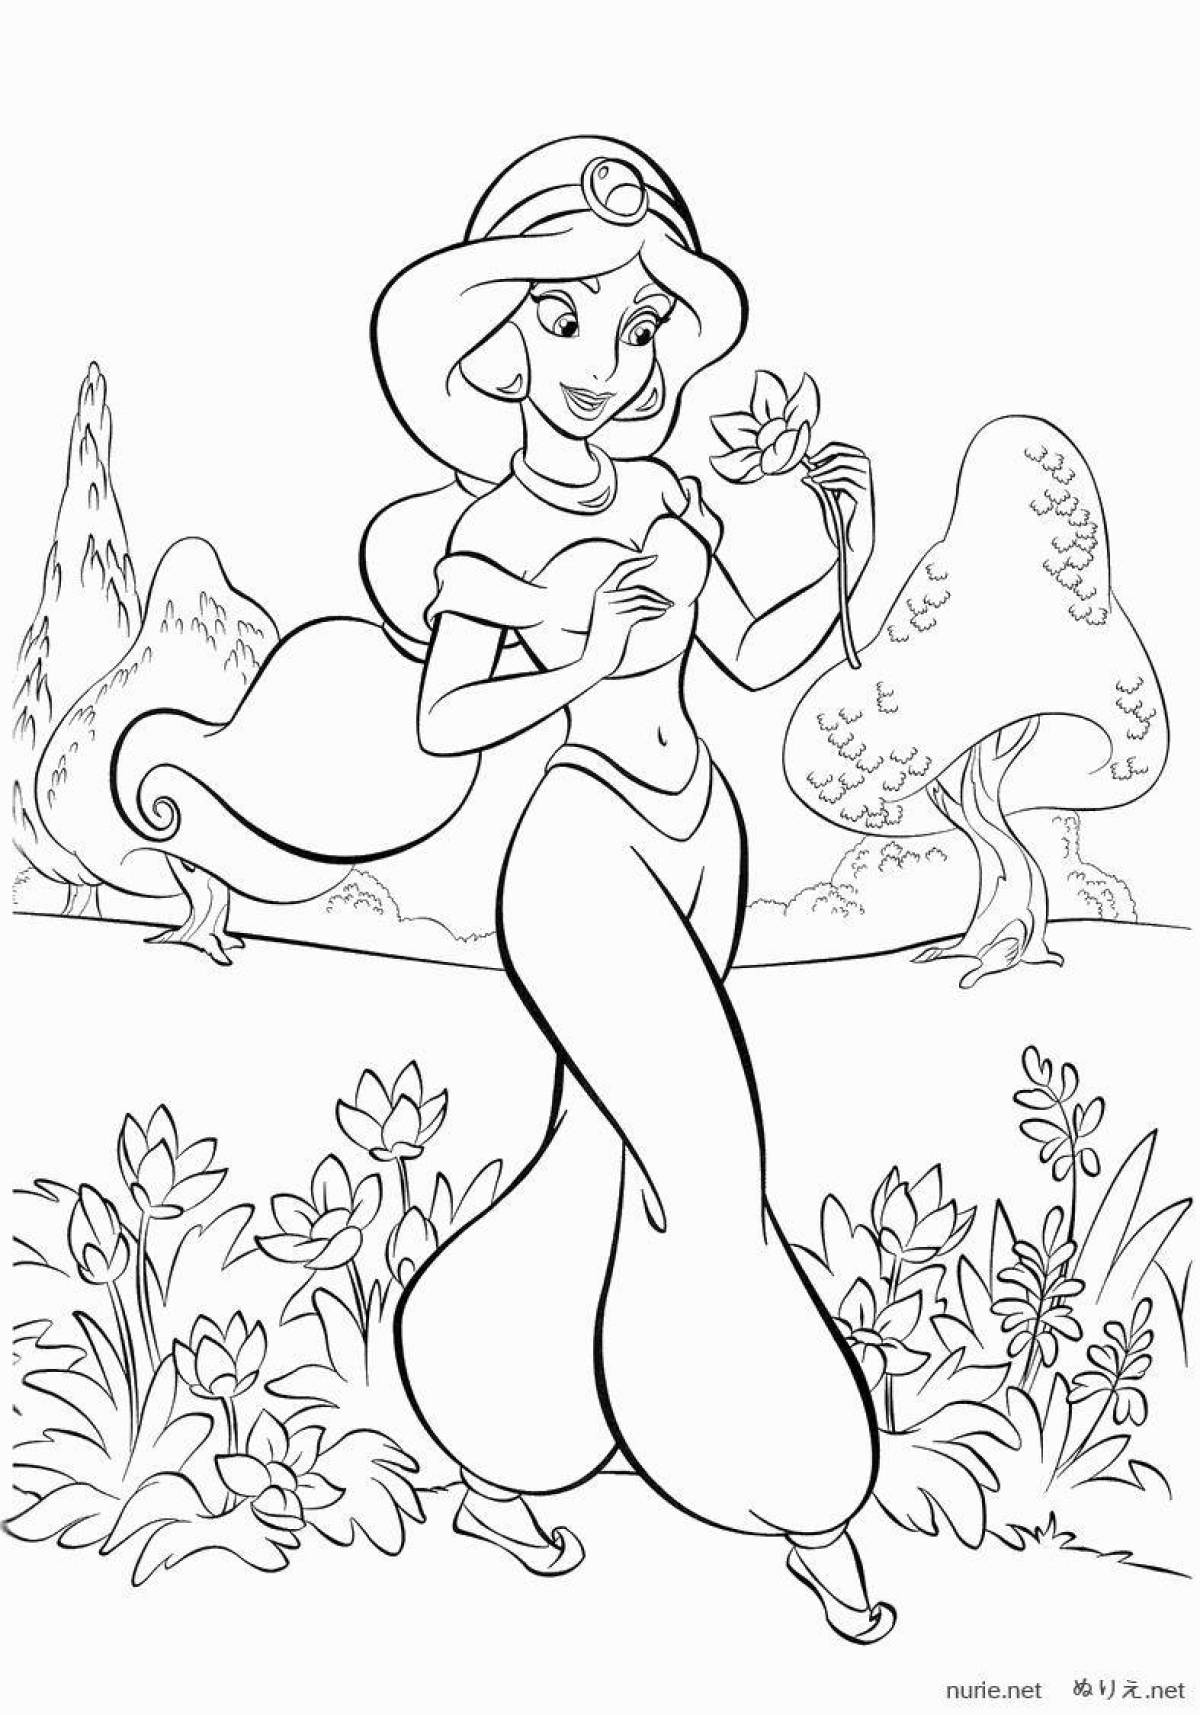 Disney girls glowing coloring pages